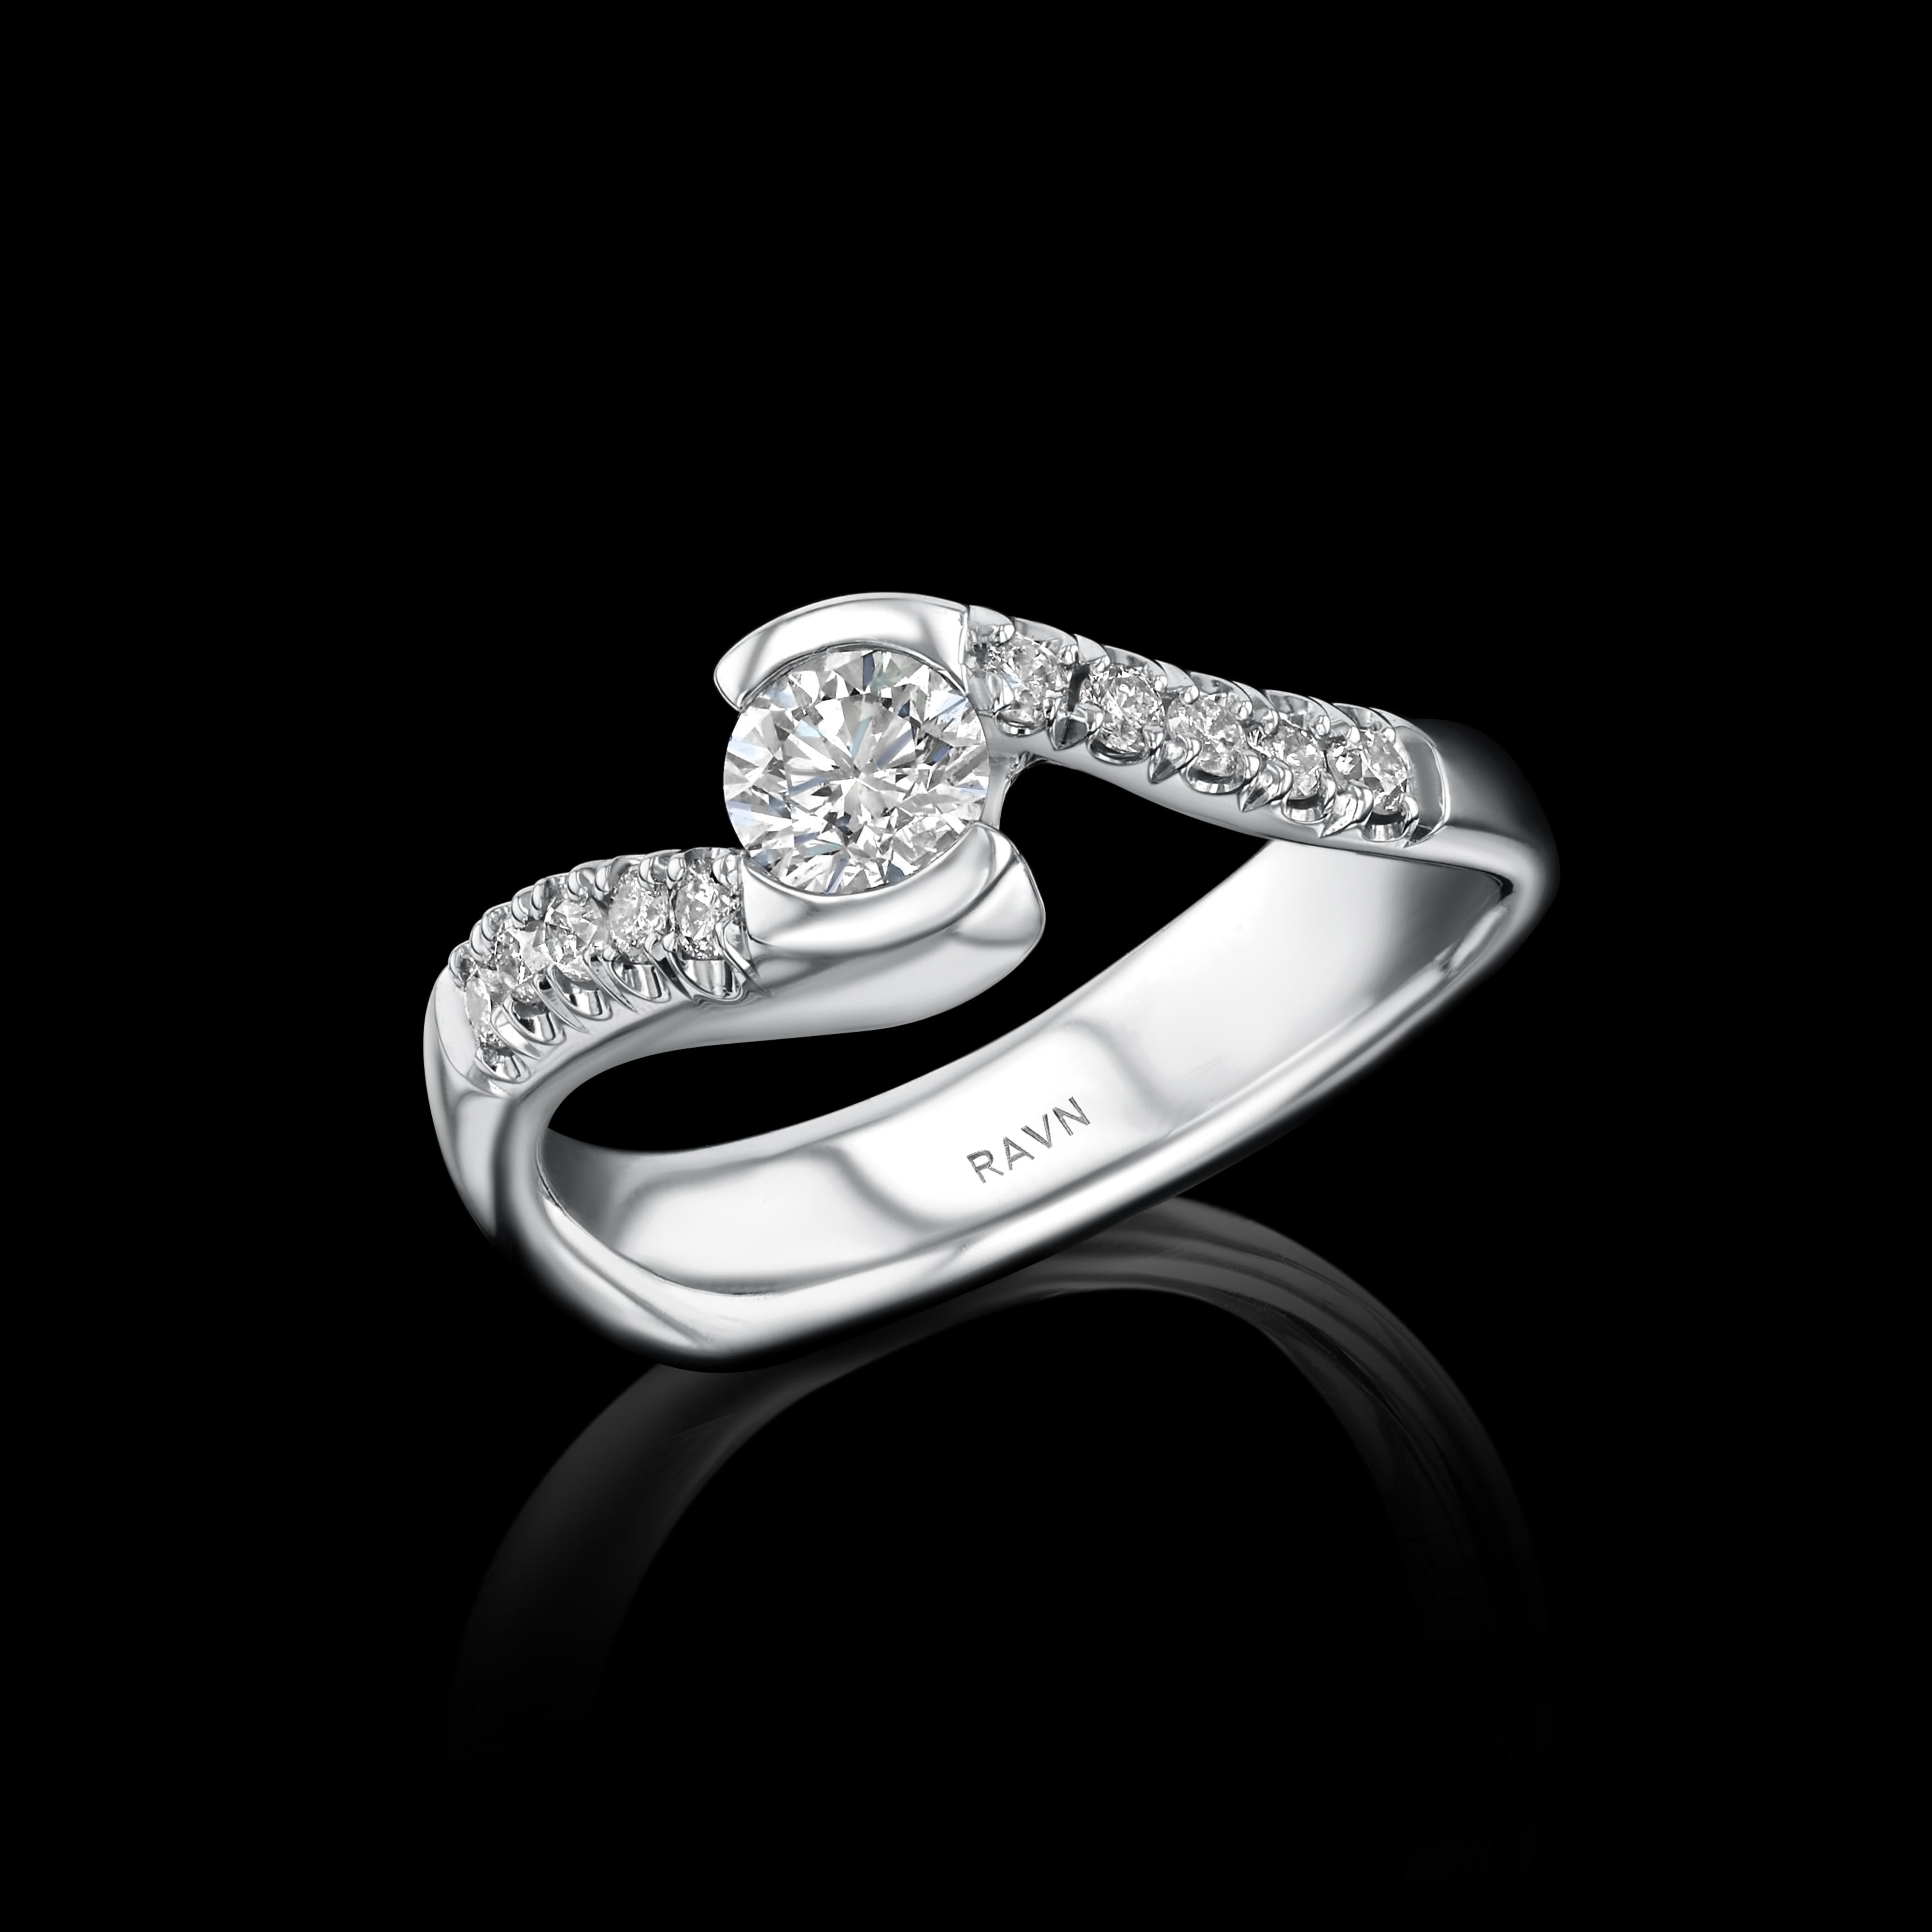 18k white gold, hand carved twist half bezel diamond ring, with .35ct center diamond and 10 shoulder diamonds (0.10ct) from the House of RAVN Diamond Collection.   

Features .45ct total diamonds.    



The House of RAVN Diamond Collection is as an